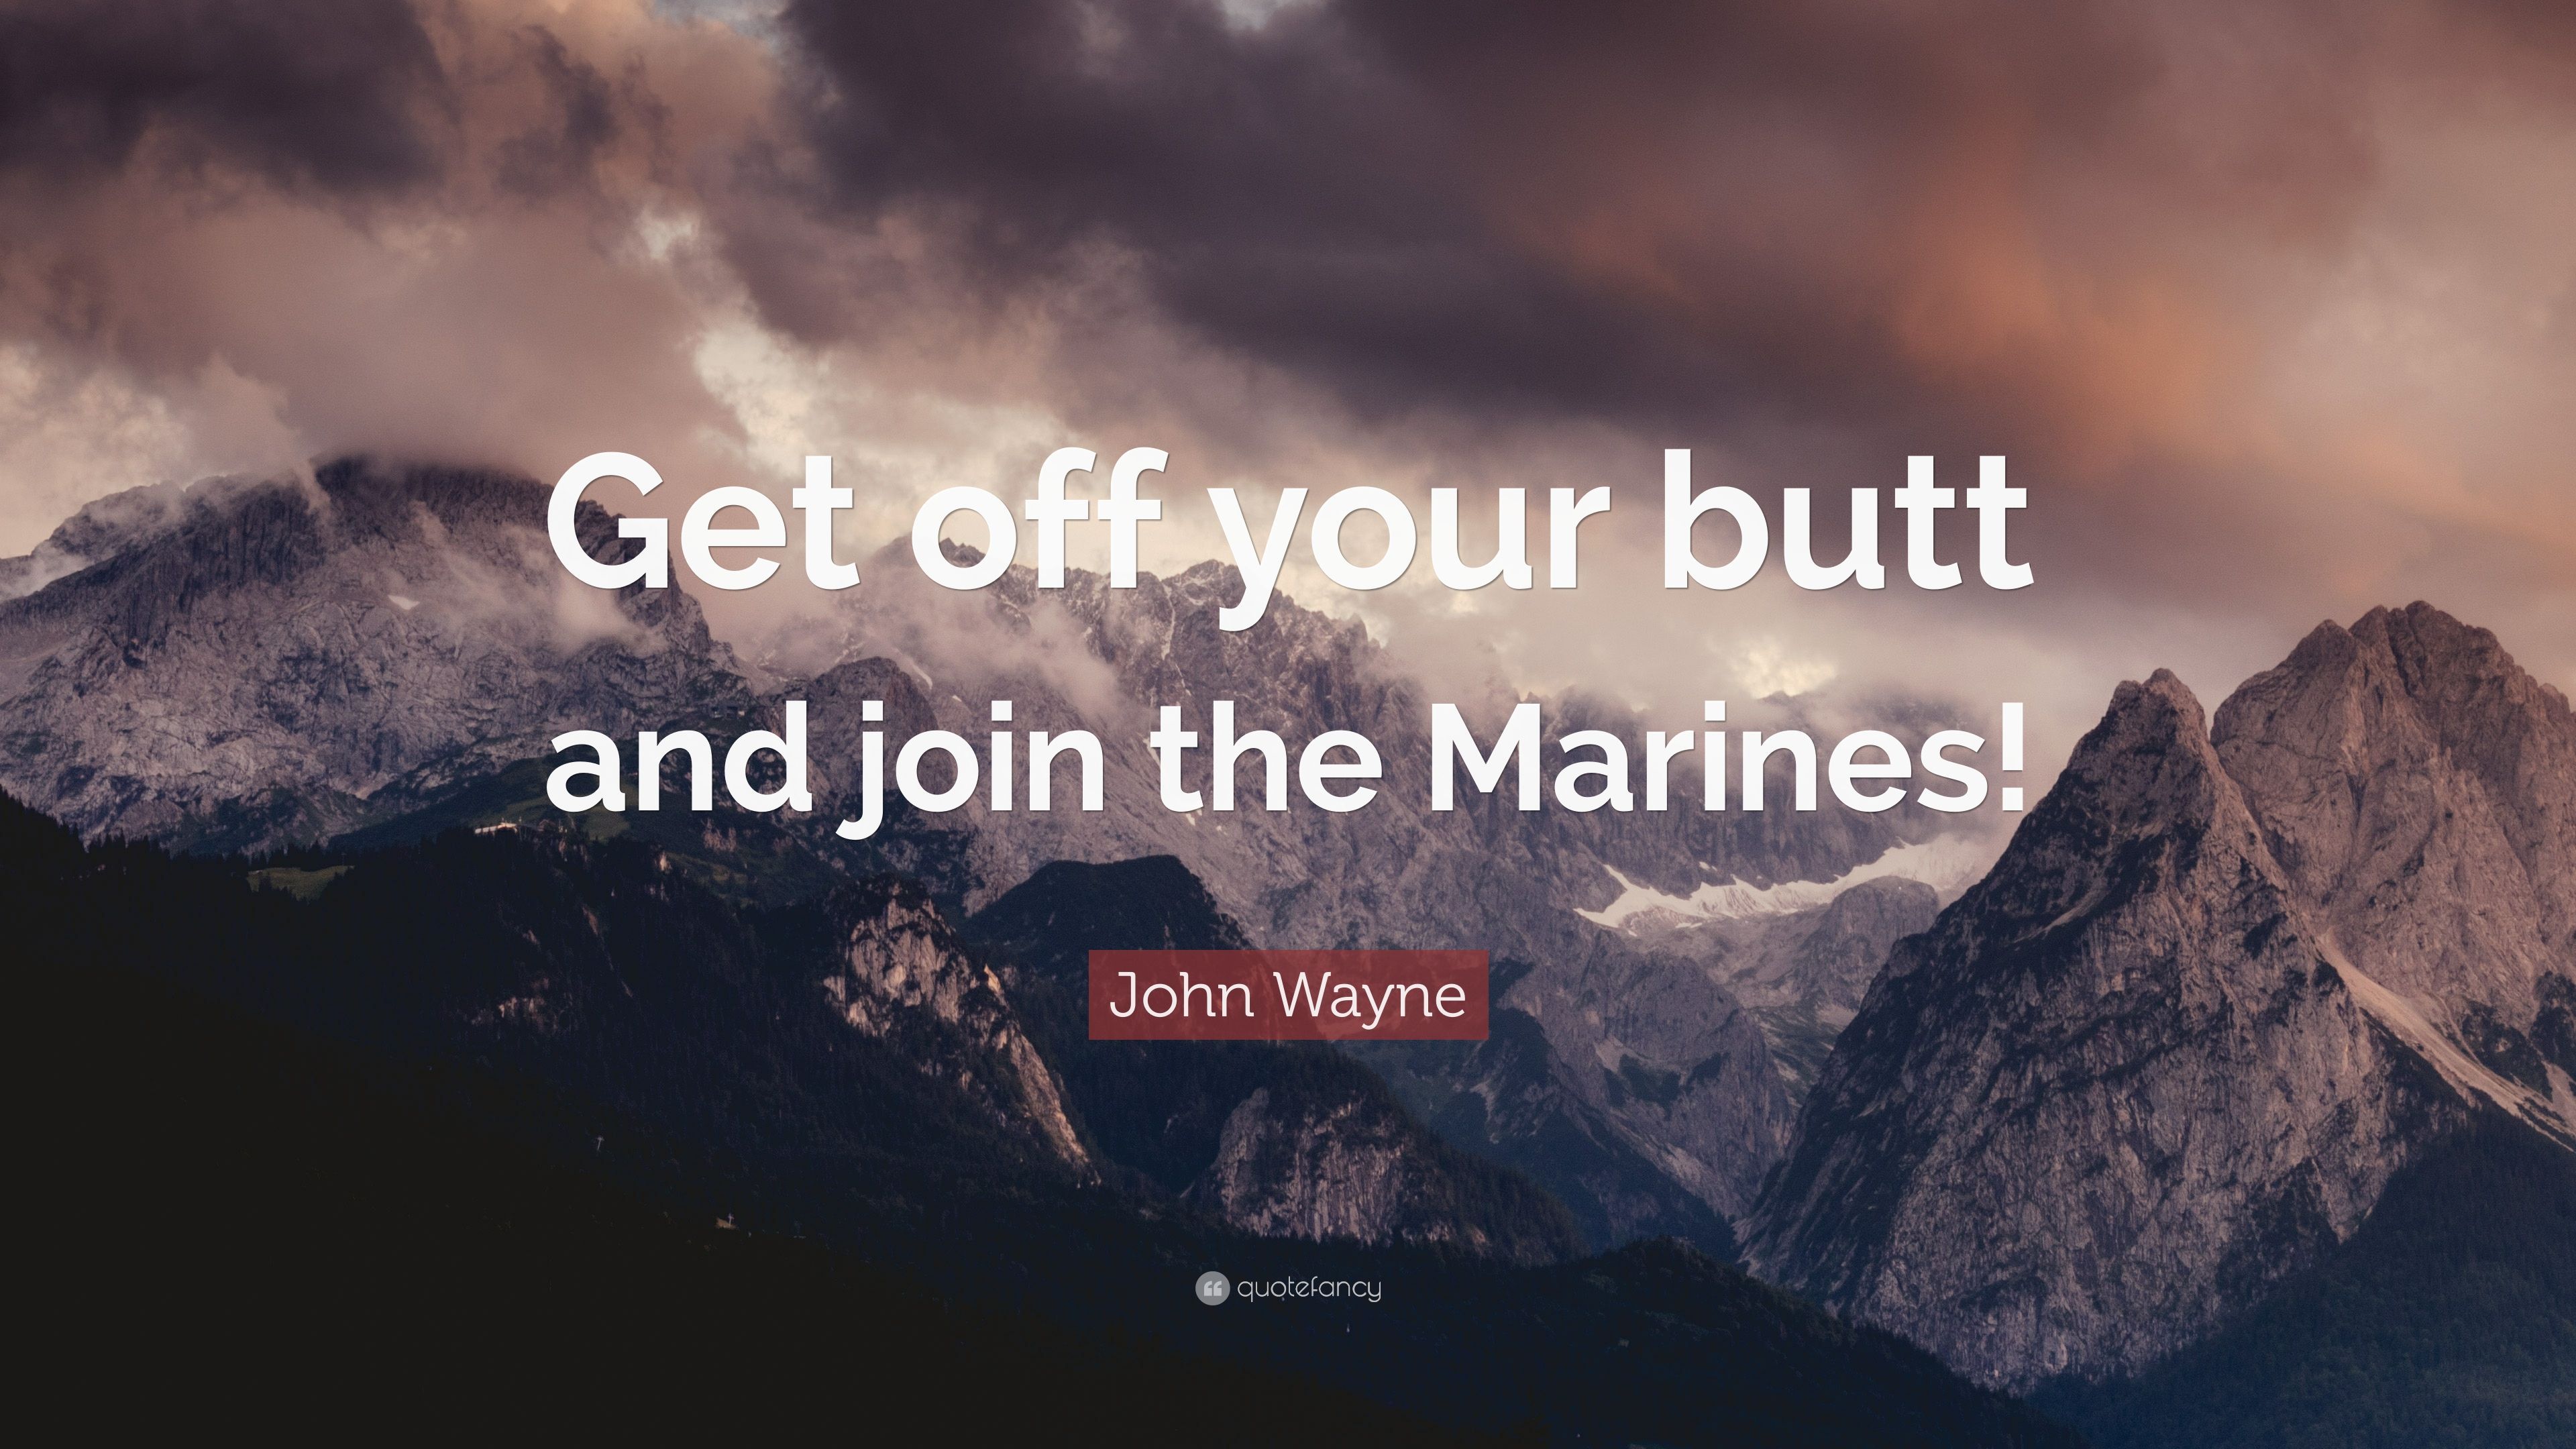 John Wayne Quote: “Get off your butt and join the Marines!” (10 wallpaper)